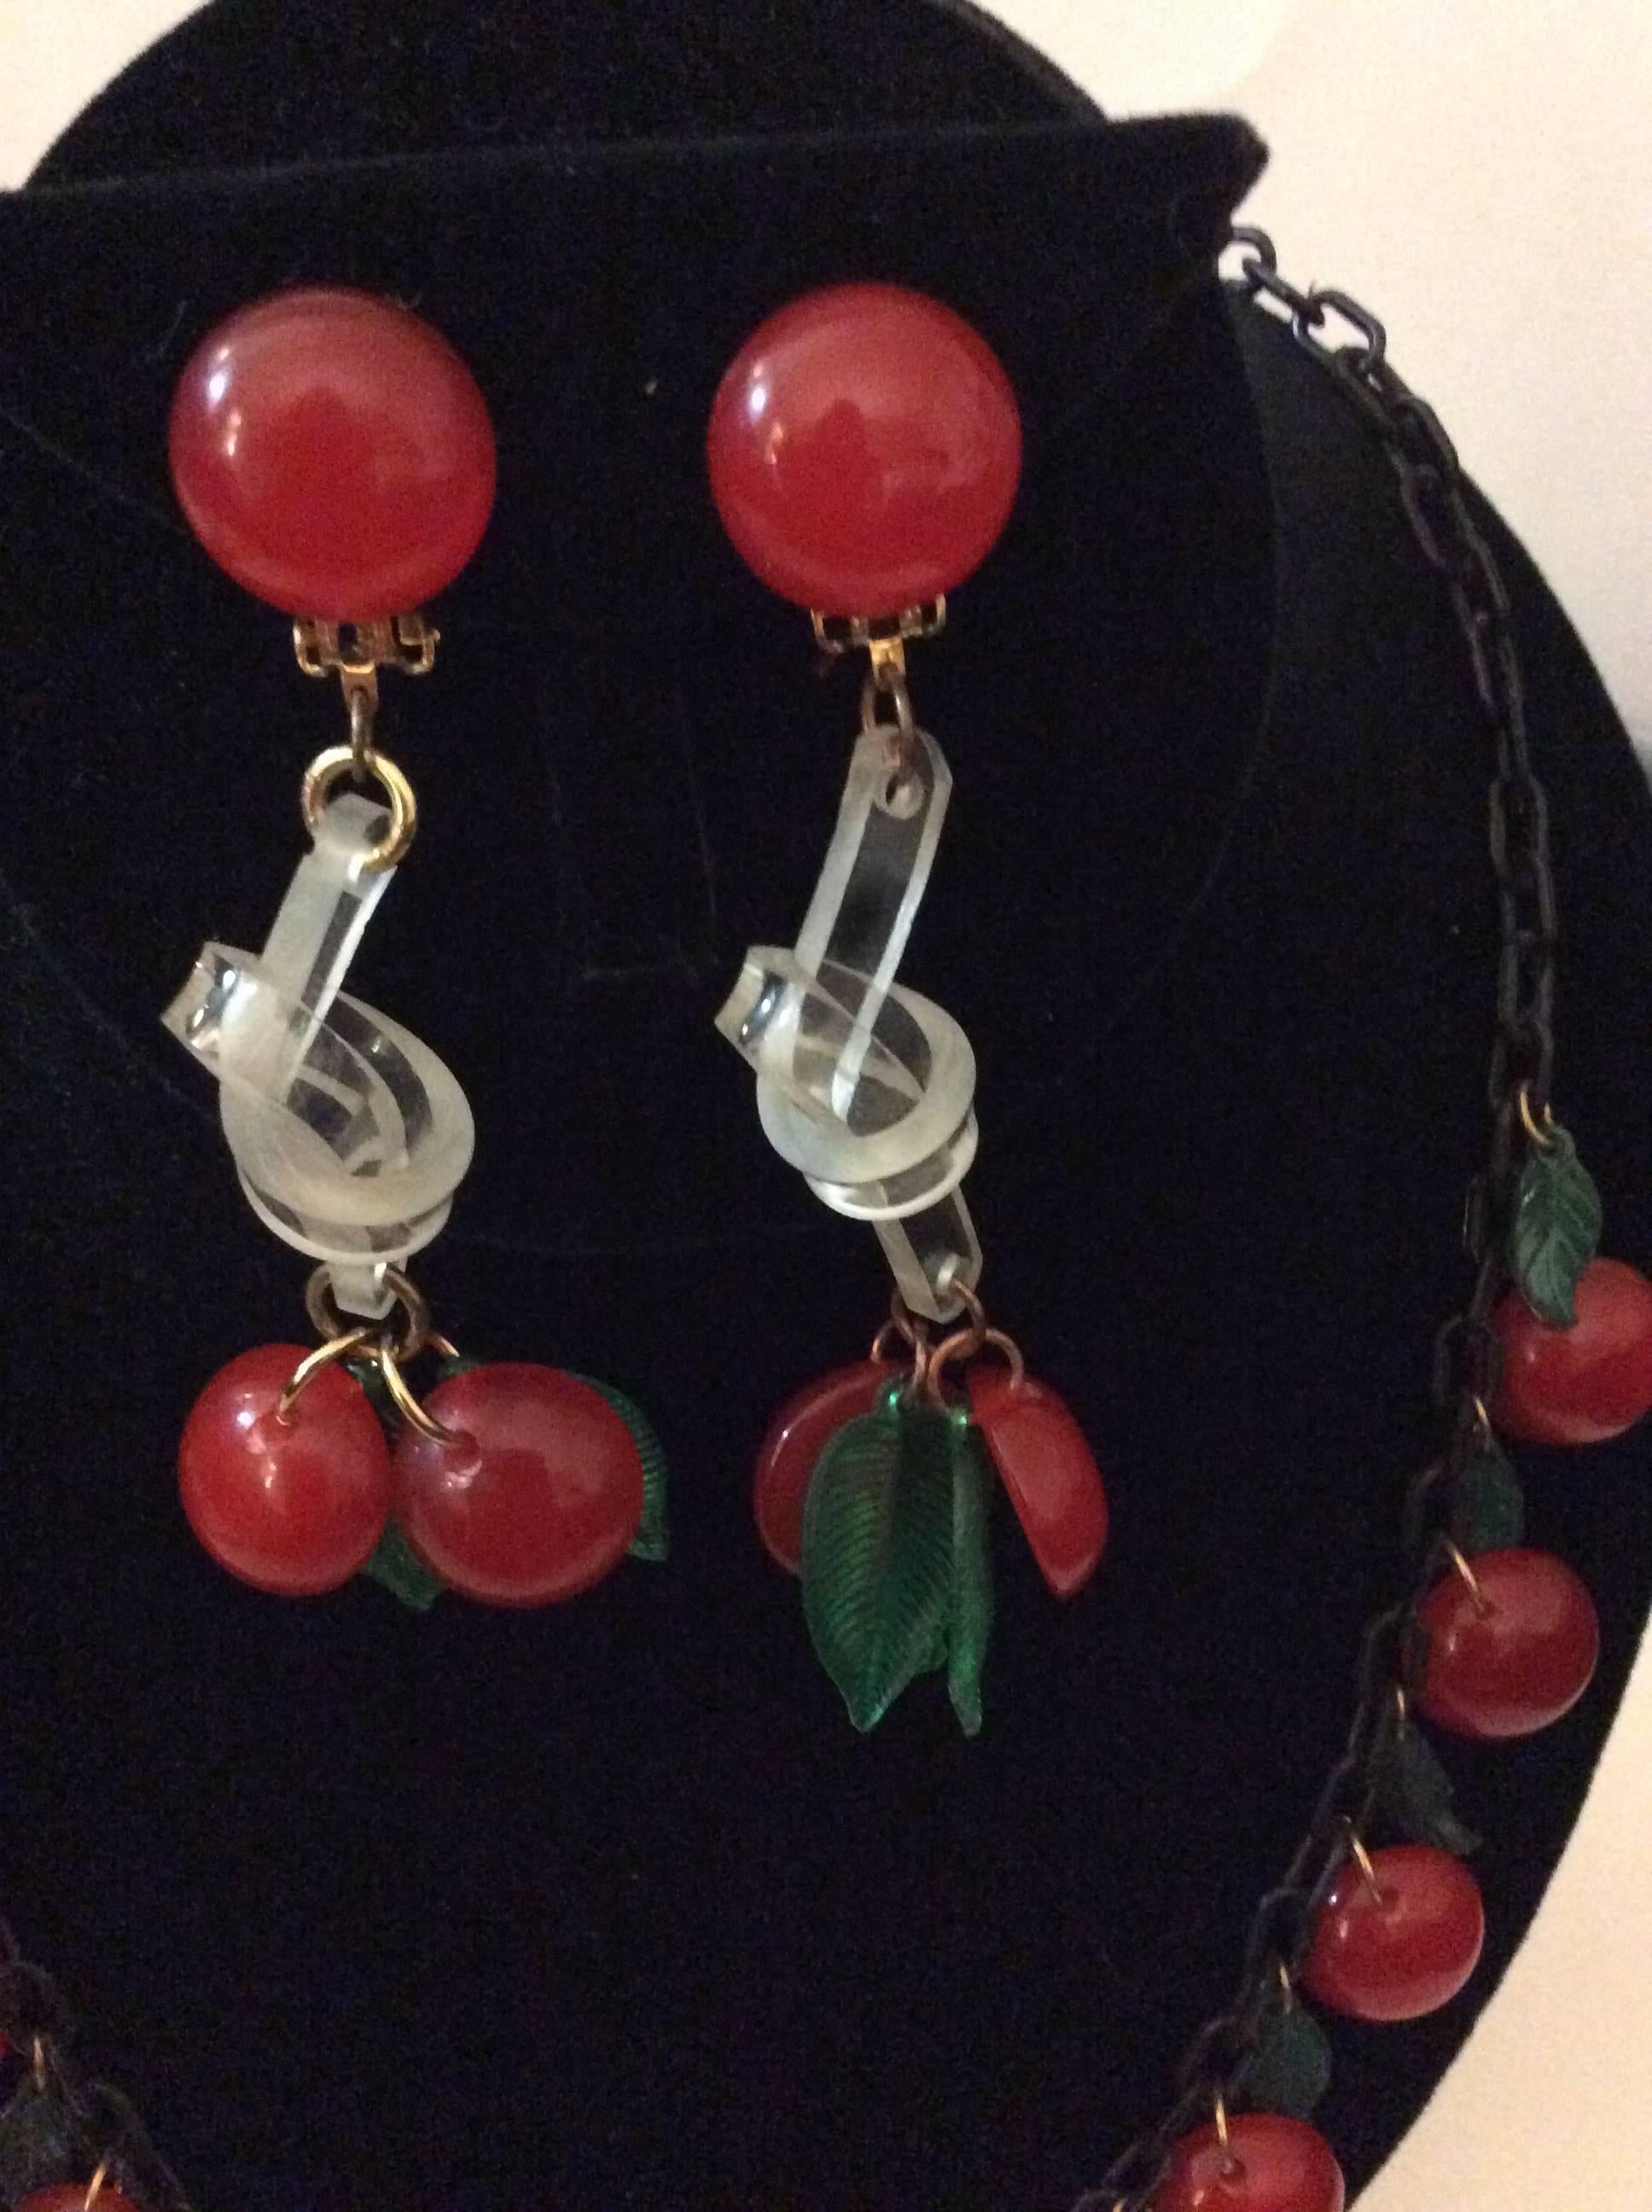  Bakelite Cherry Necklace with Matching Earrings In Excellent Condition For Sale In Boca Raton, FL